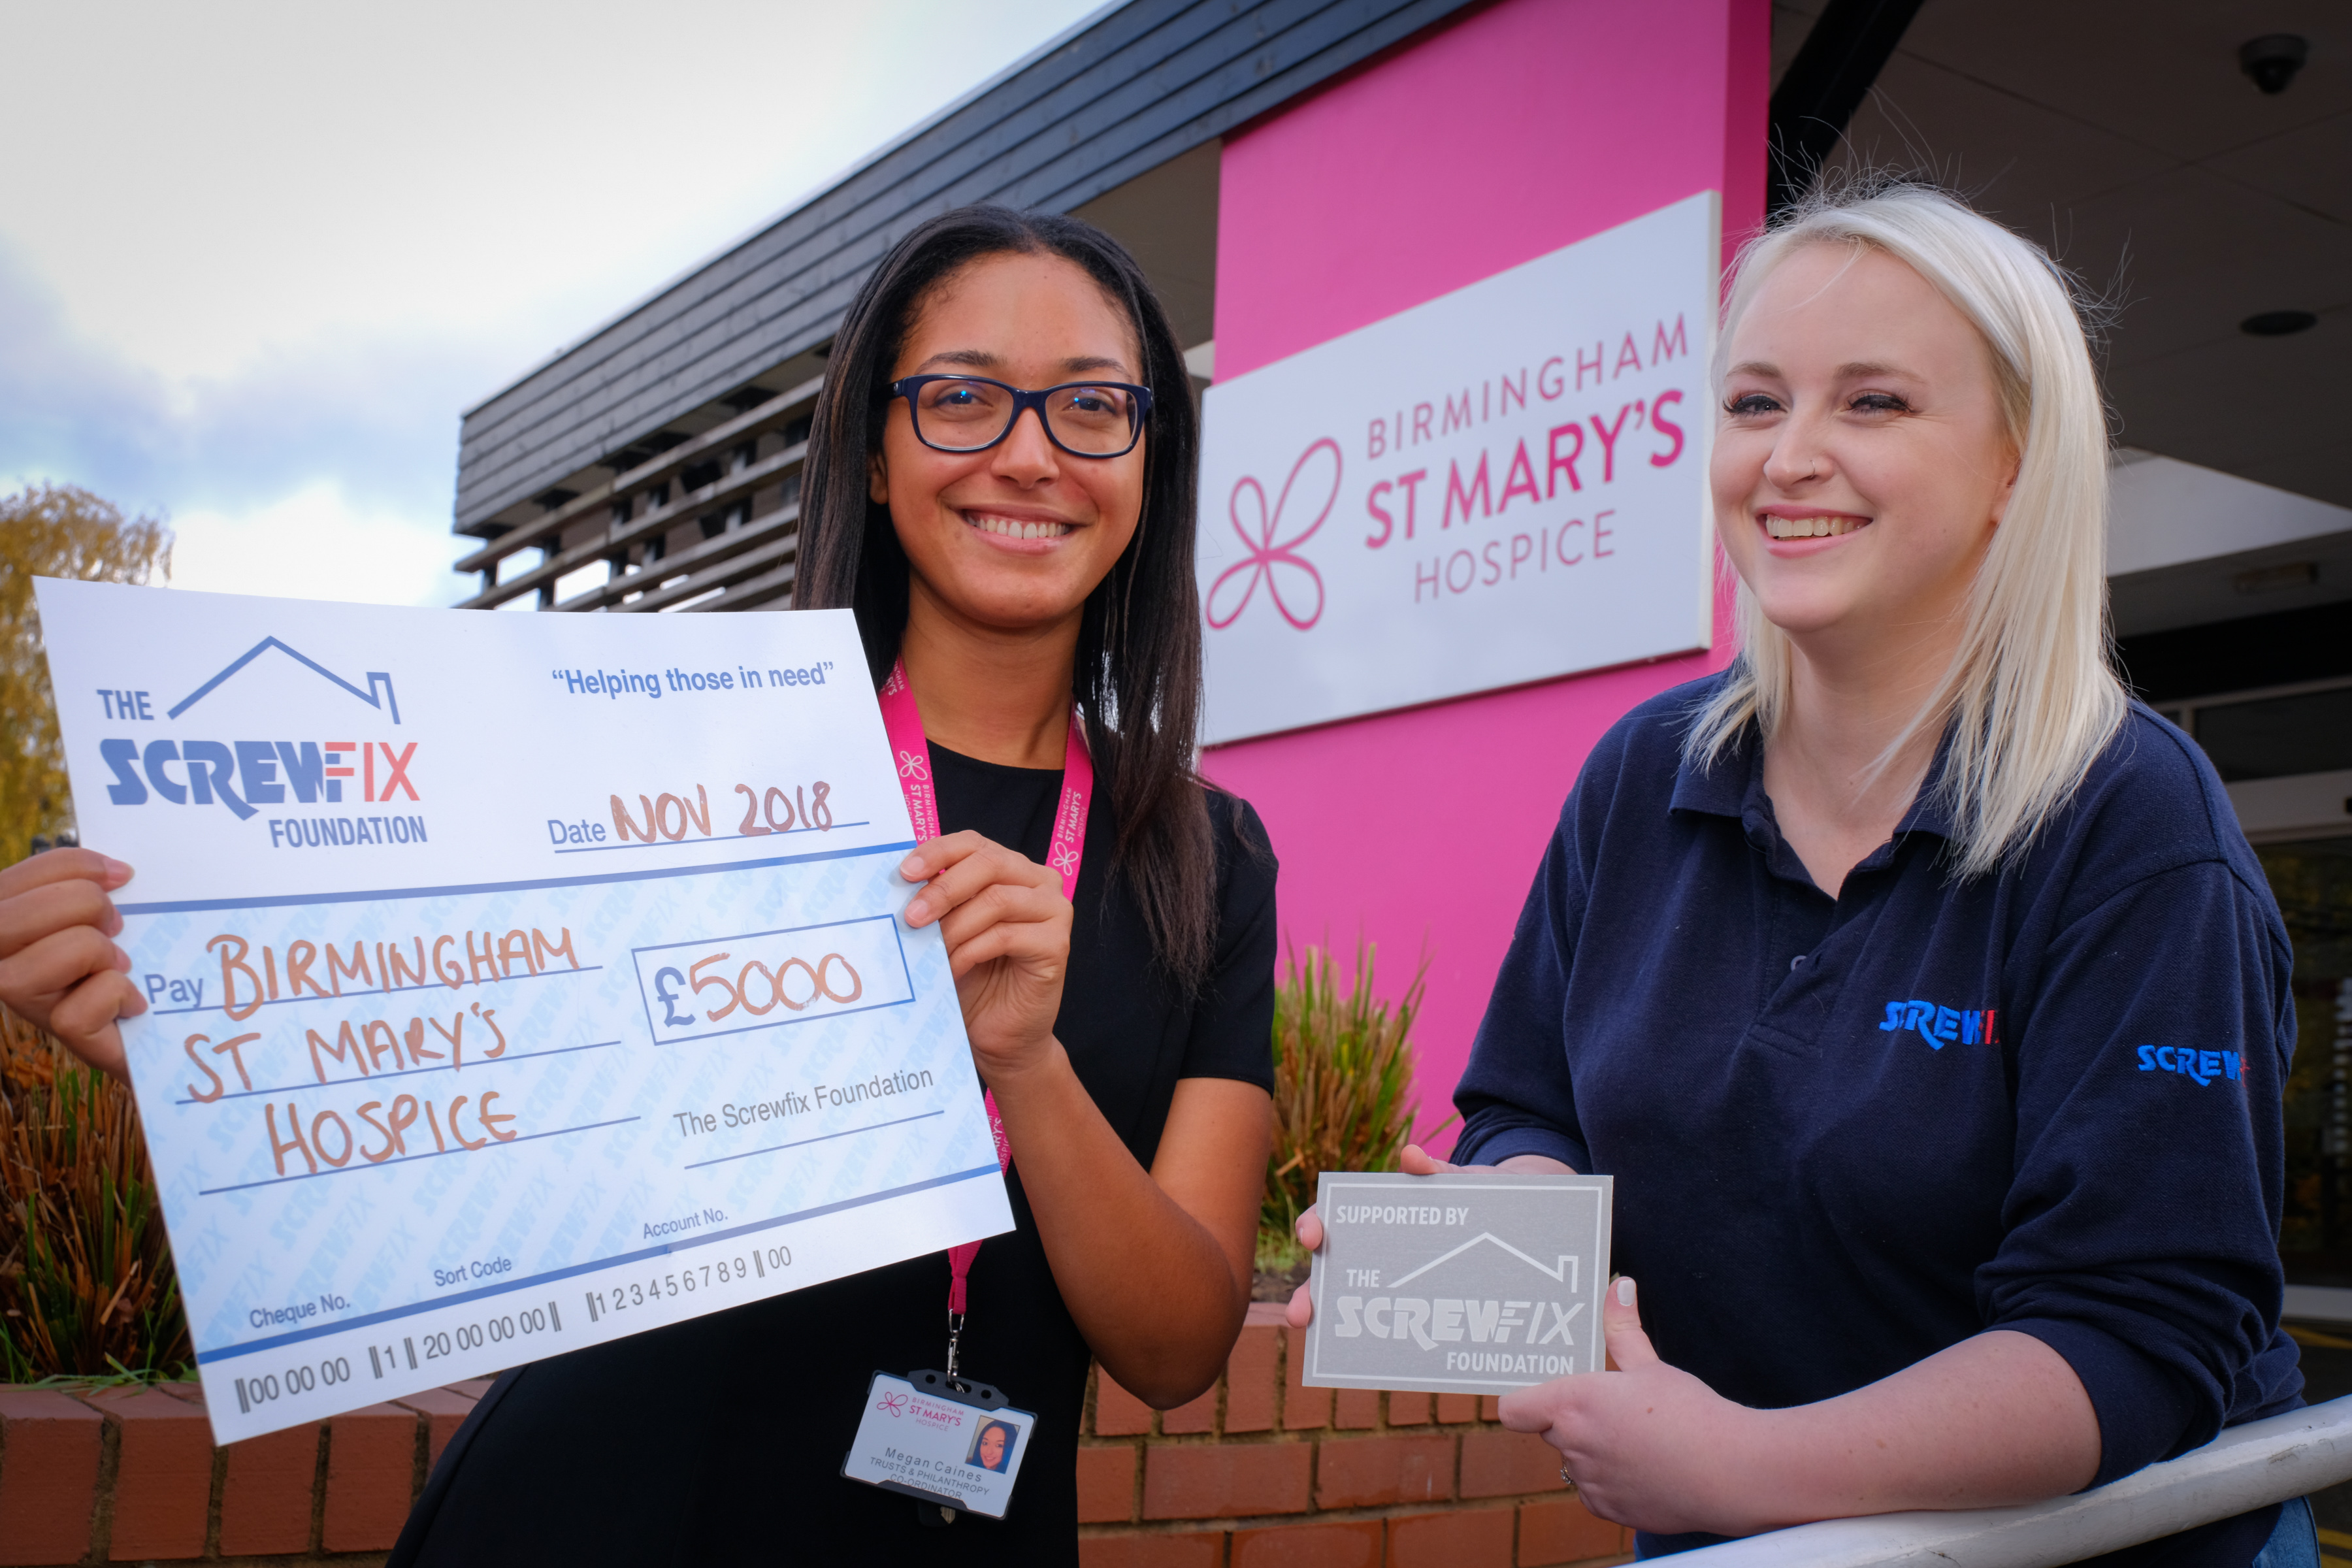 Birmingham St Marys Hospice gets a helping hand from the Screwfix Foundation